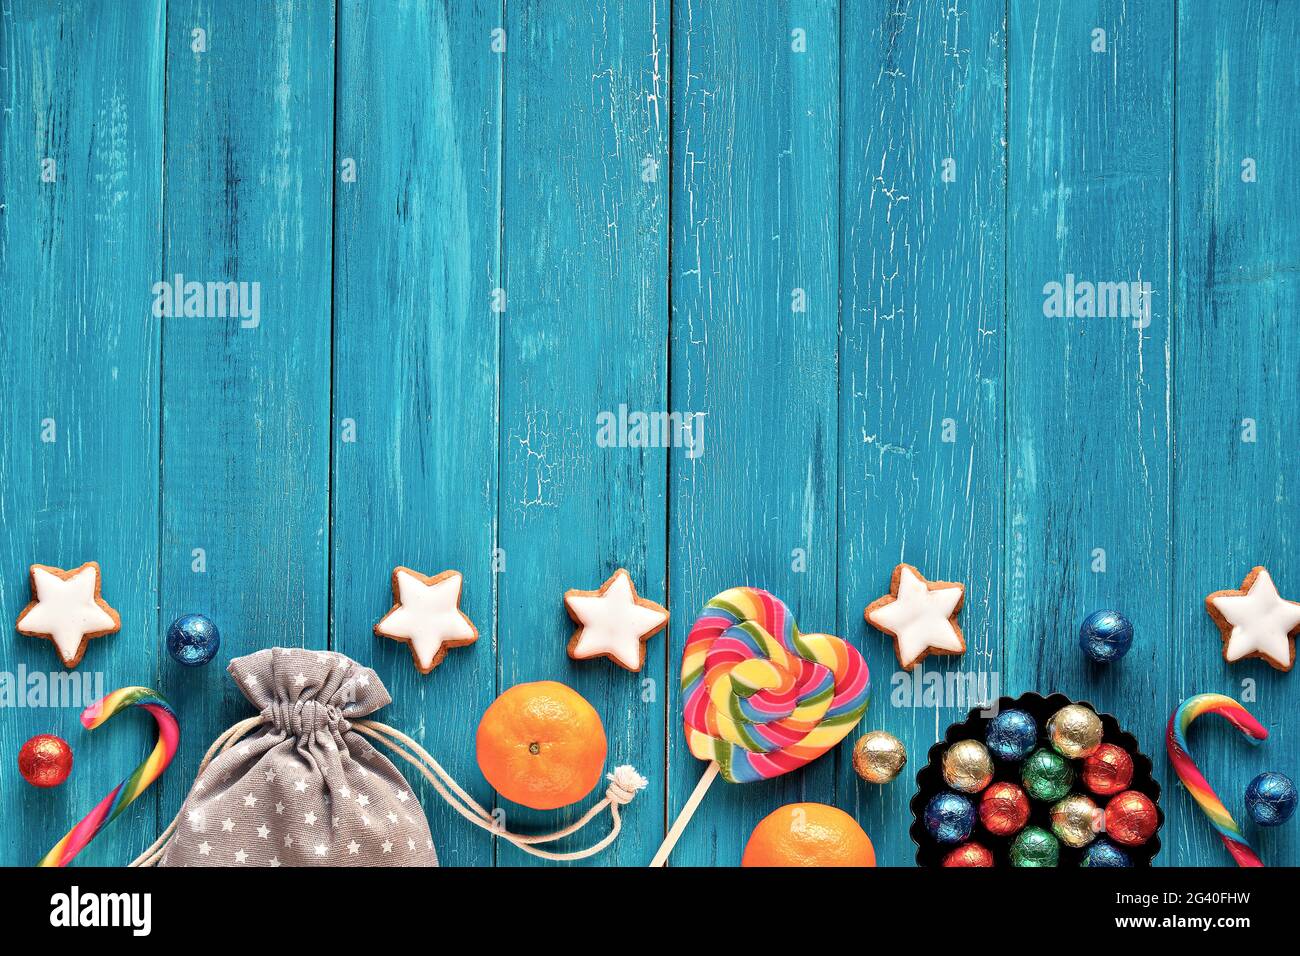 Saint Nicholas Day or Nikolaus Tag in German language. Traditional holiday in Germany, Europe. Decorative border - sweets, candy, cookies, satsuma and Stock Photo